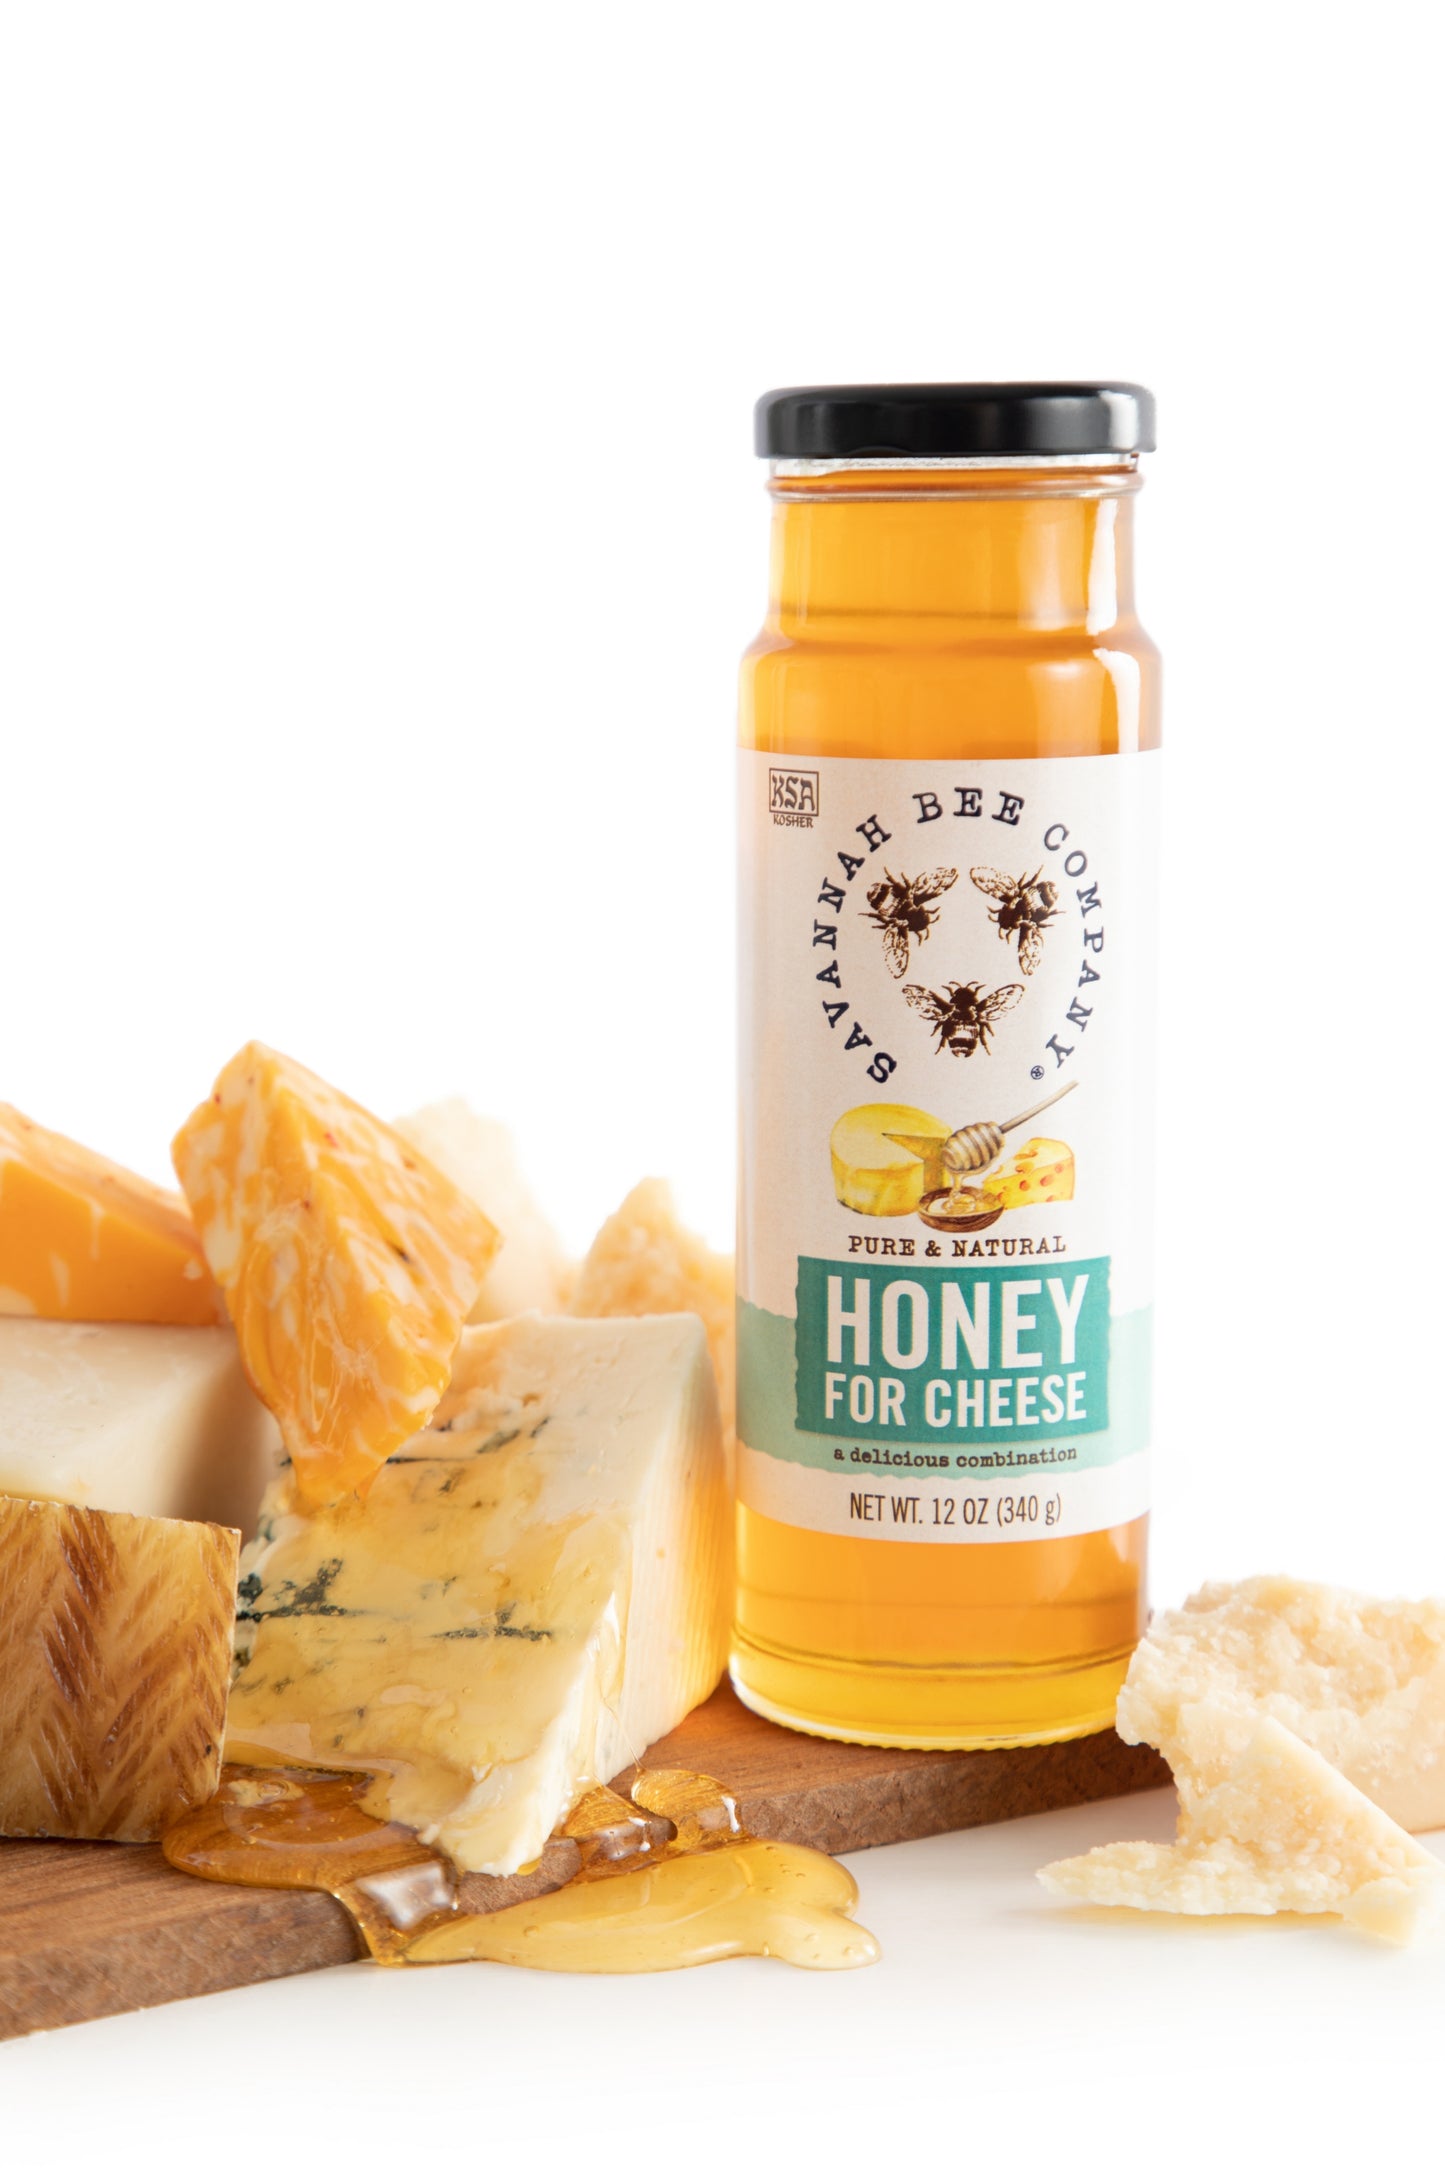 Honey for Cheese, a delicious combination 12 oz. tower  on a board of cheese.